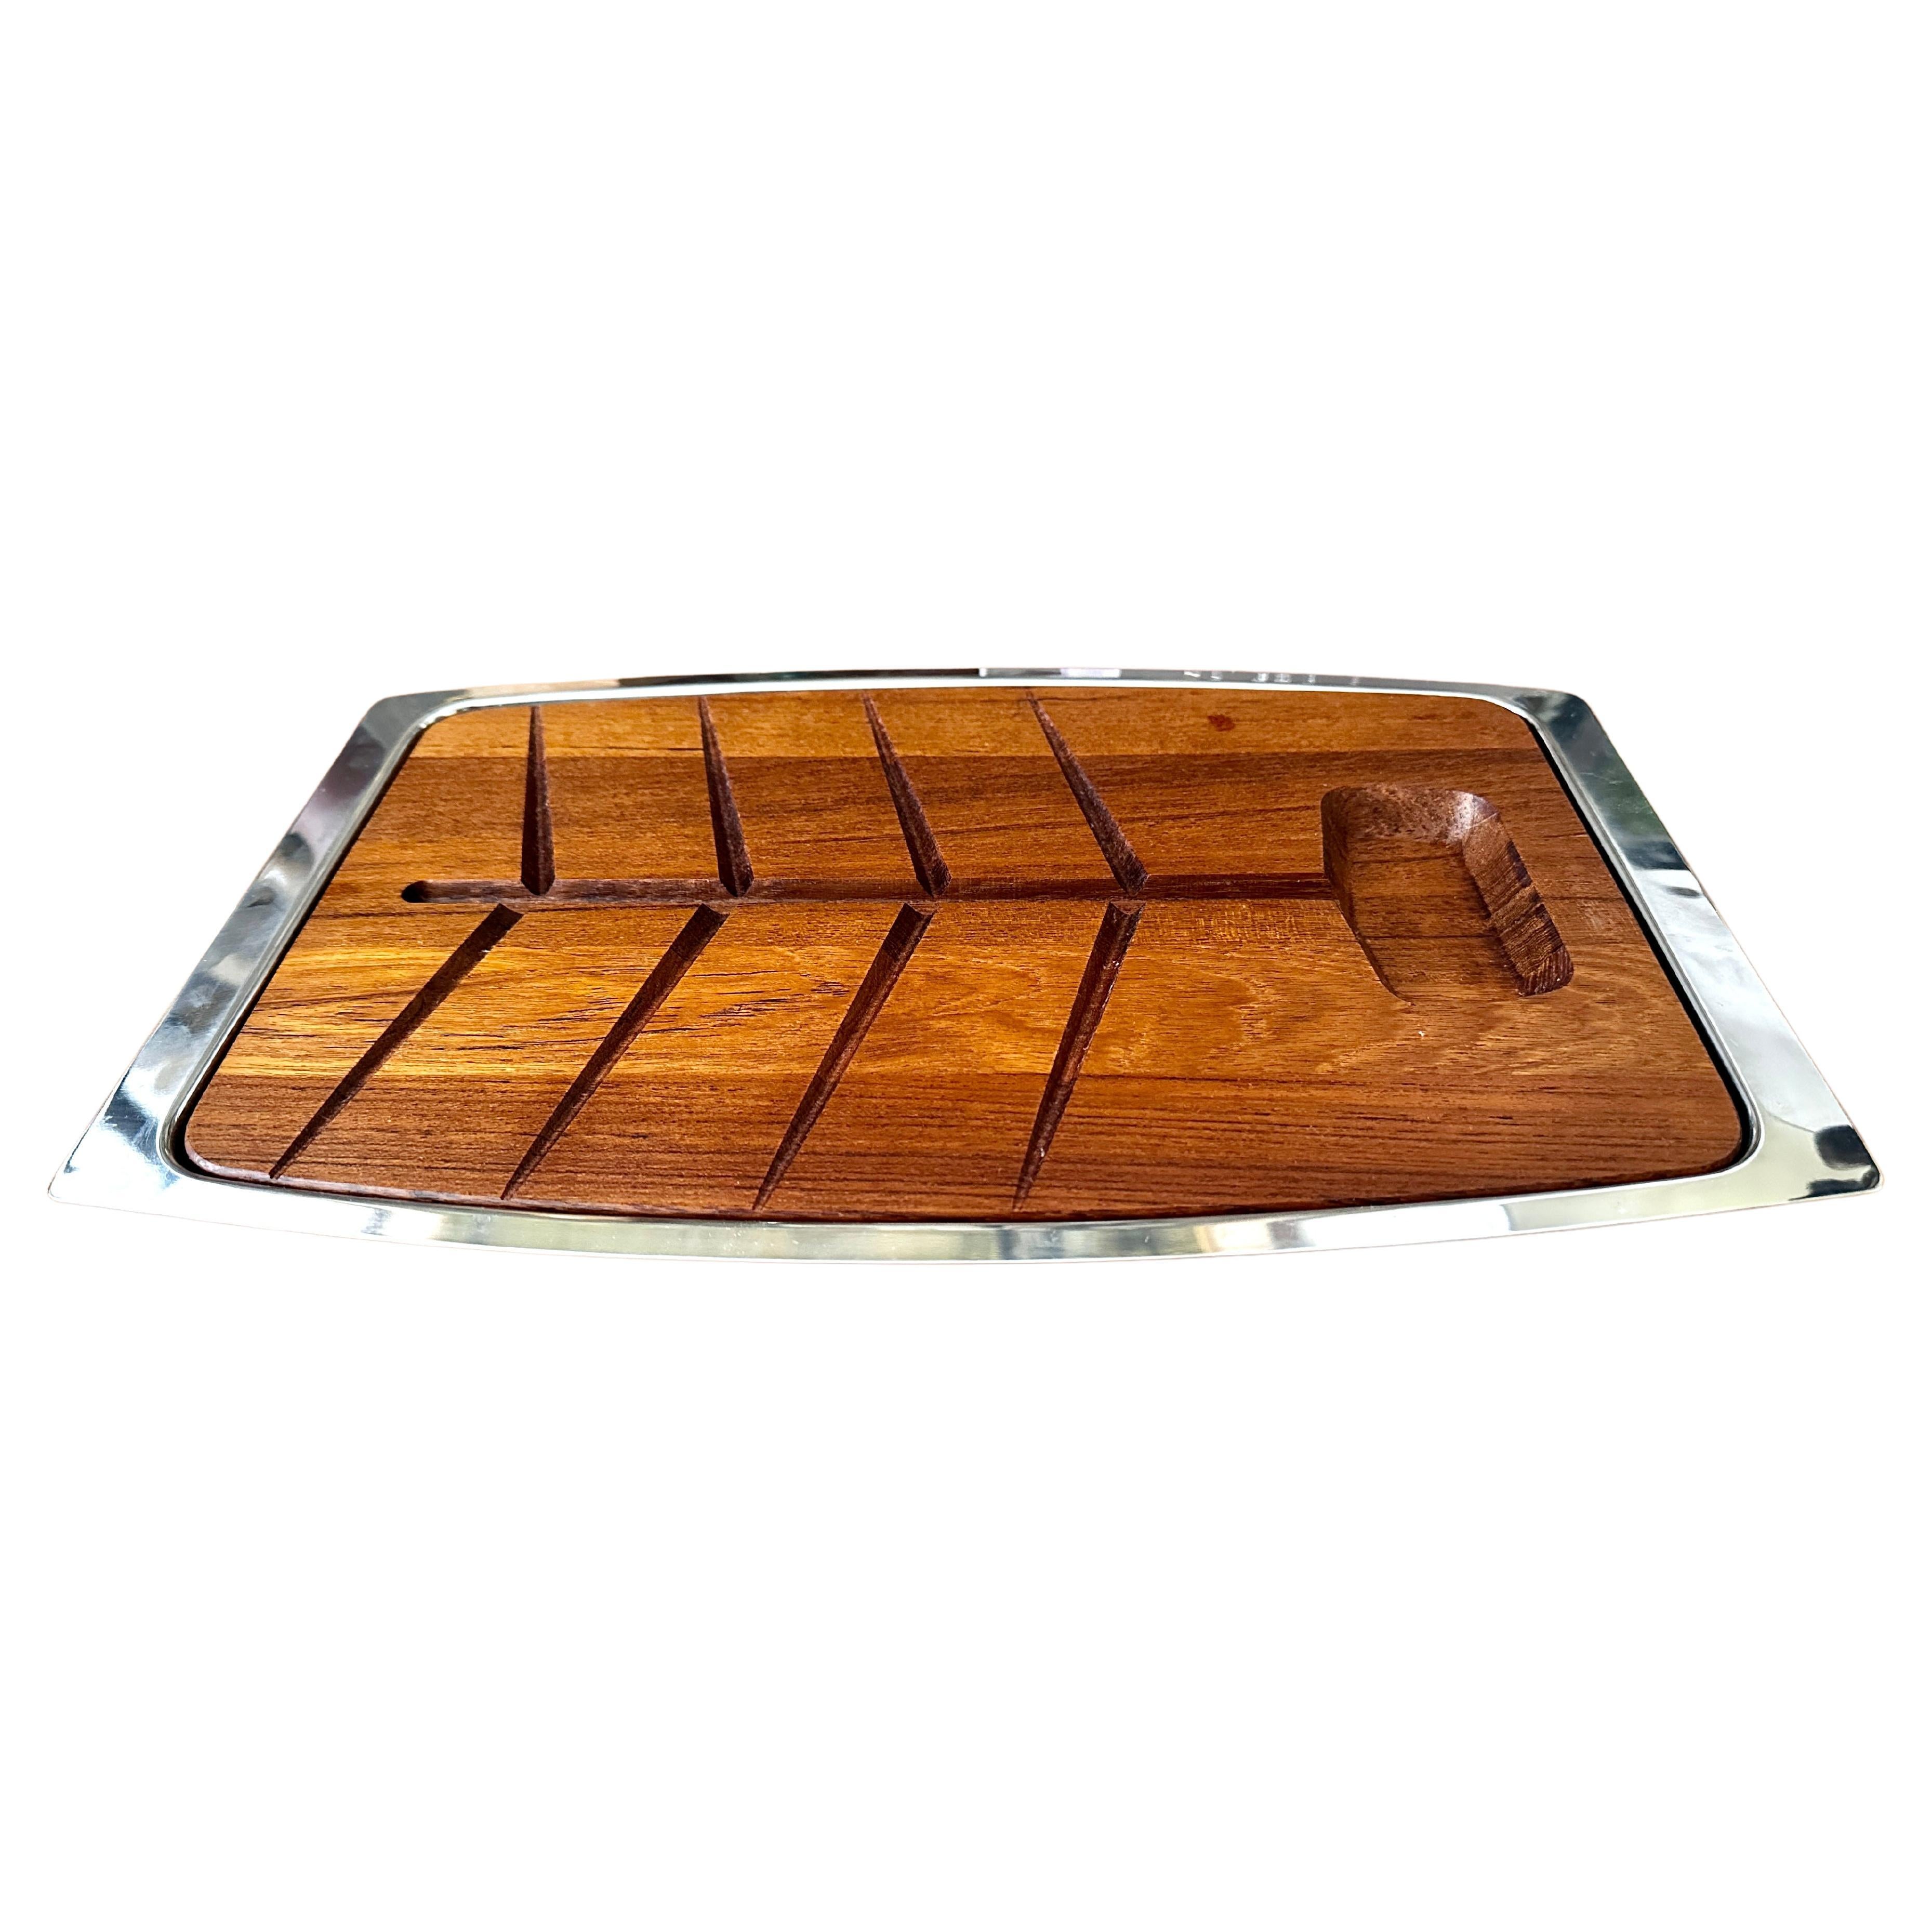 Stelton Stainless Steel And Teak Serving Tray For Sale